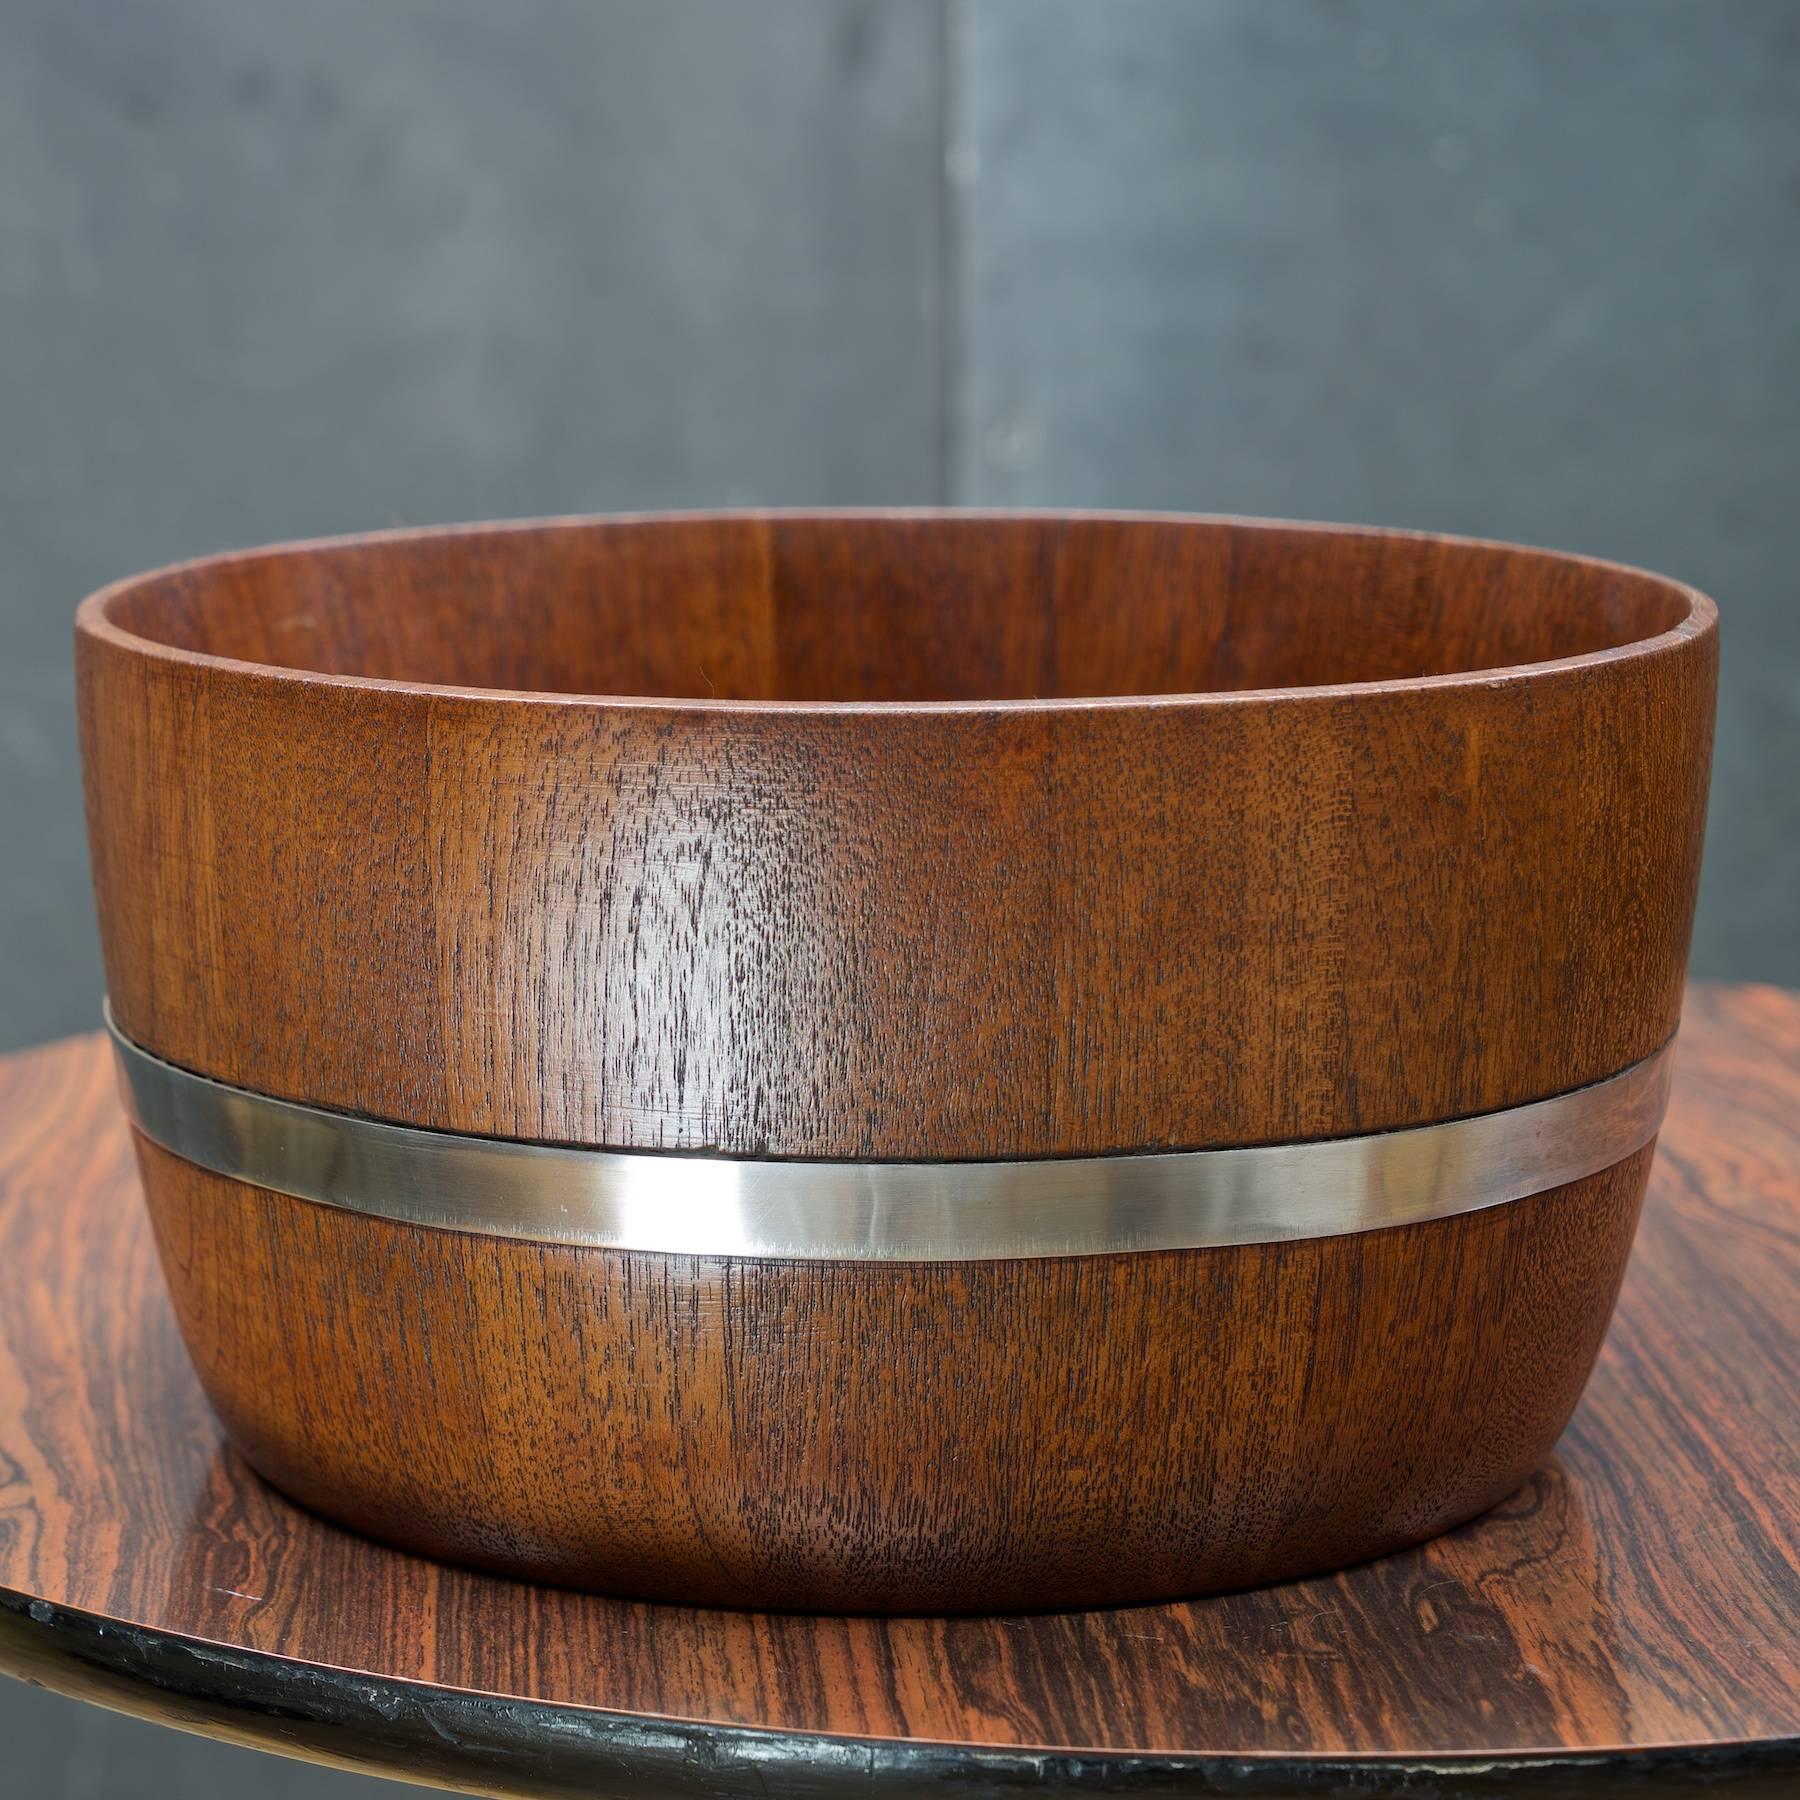 Barrel bowl diameter: 10.88 in.
Early and rare teak bowl by Nissen-Quistgaard. Burnished, JHQ (Pre-1962) Denmark (Pre-1954.) 

Salad tongs L: 15 x W: 2.25 x H: 1 in.
Denmark, 1960. Exceptional original set two rare Quistgaard solid teak serving